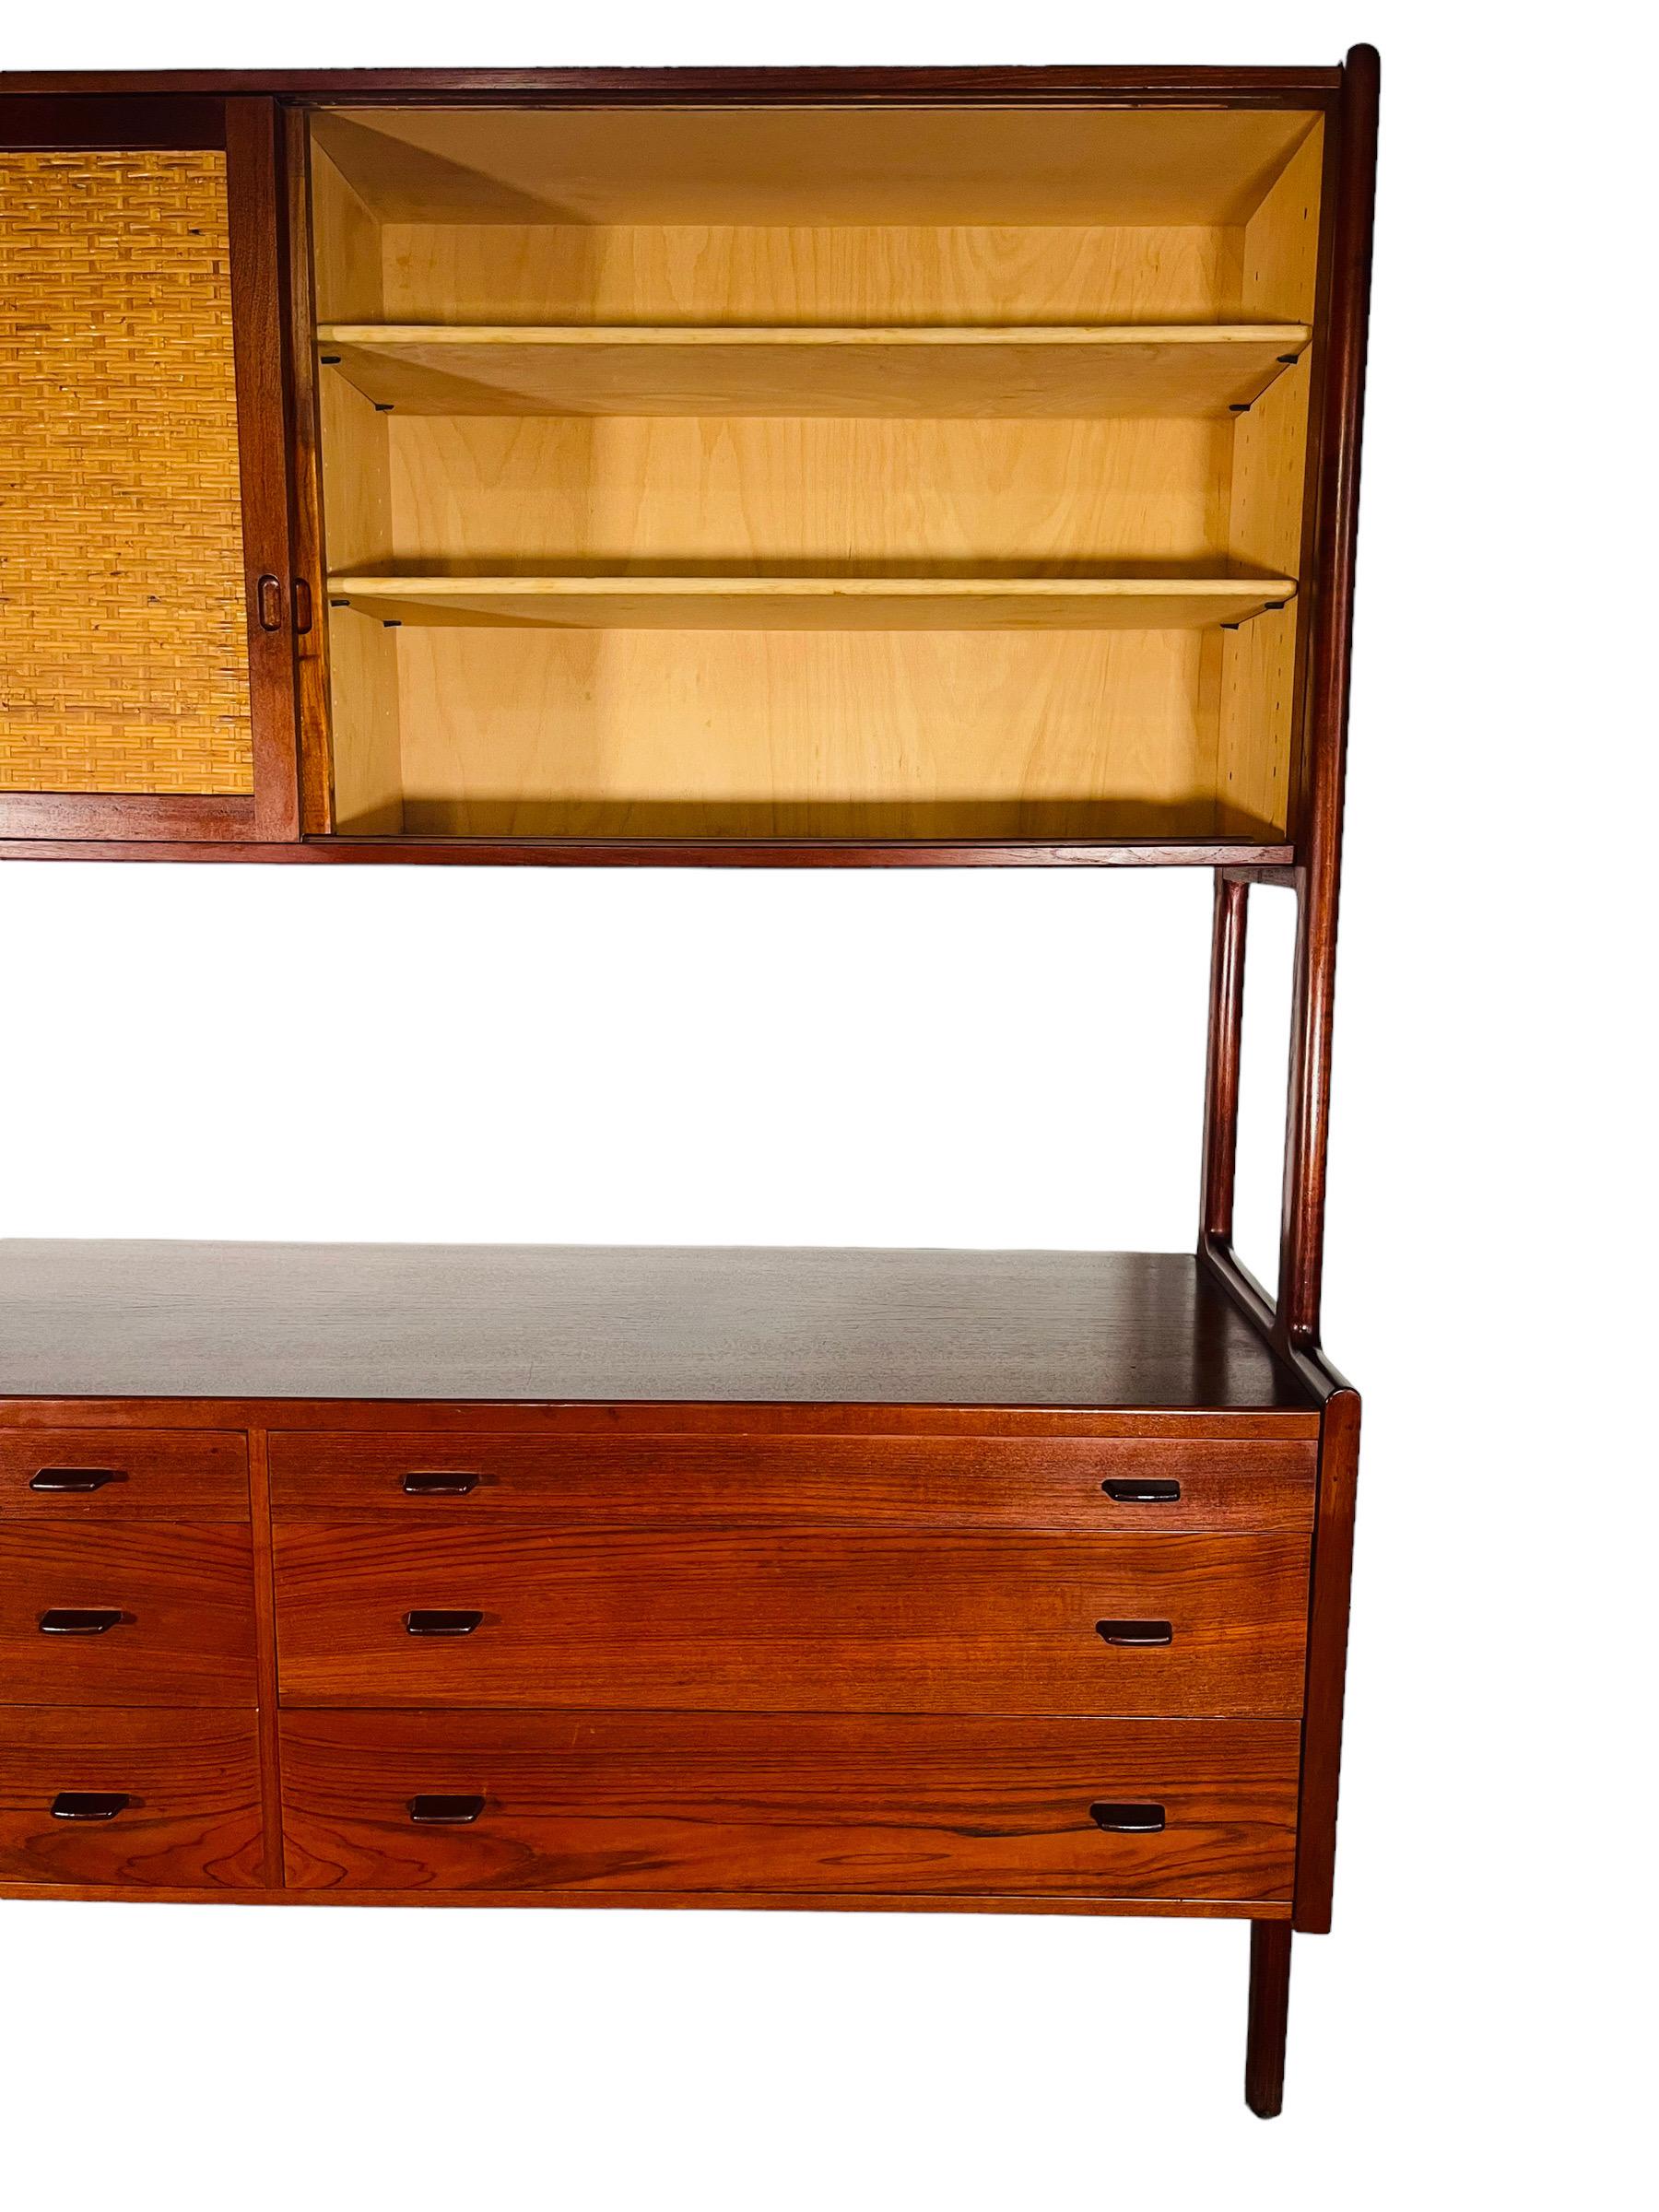 1950s Hans J. Wegner for RY Mobler Teak Credenza / Hutch In Good Condition For Sale In Brooklyn, NY